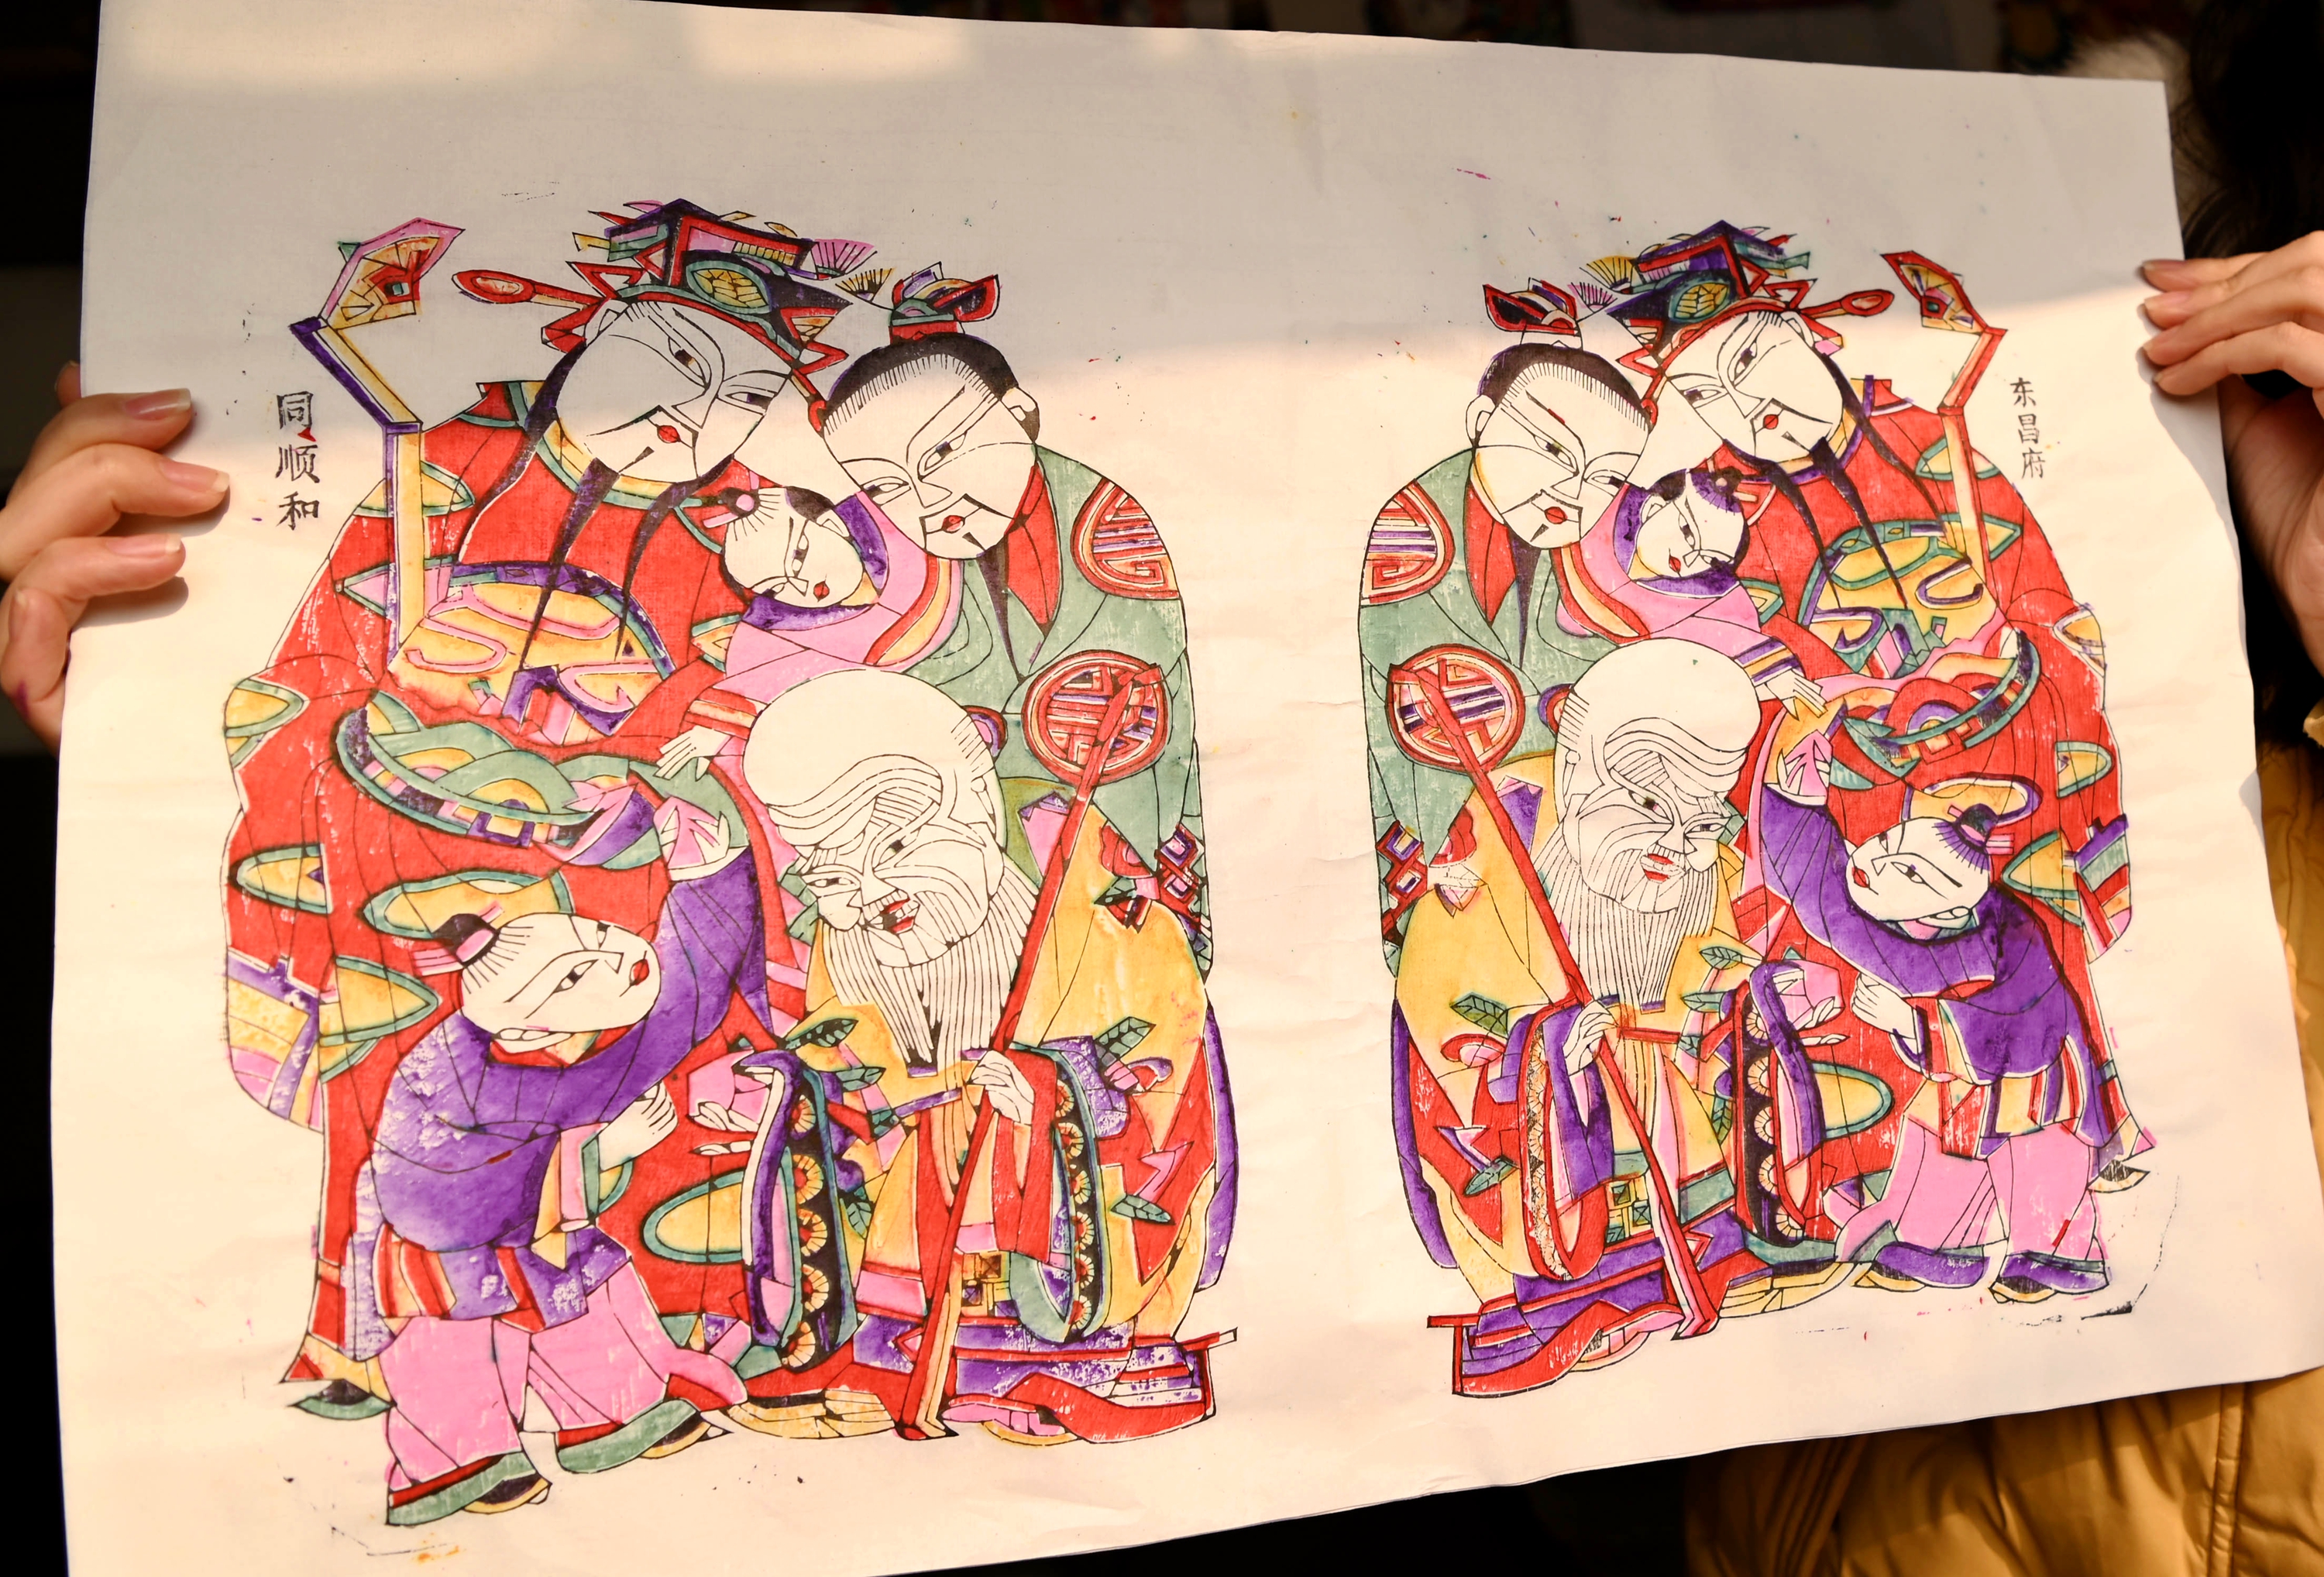 The New Year woodblock prints are showed in Liaocheng, Shandong Province on January 4, 2023. /CNSPHOTO